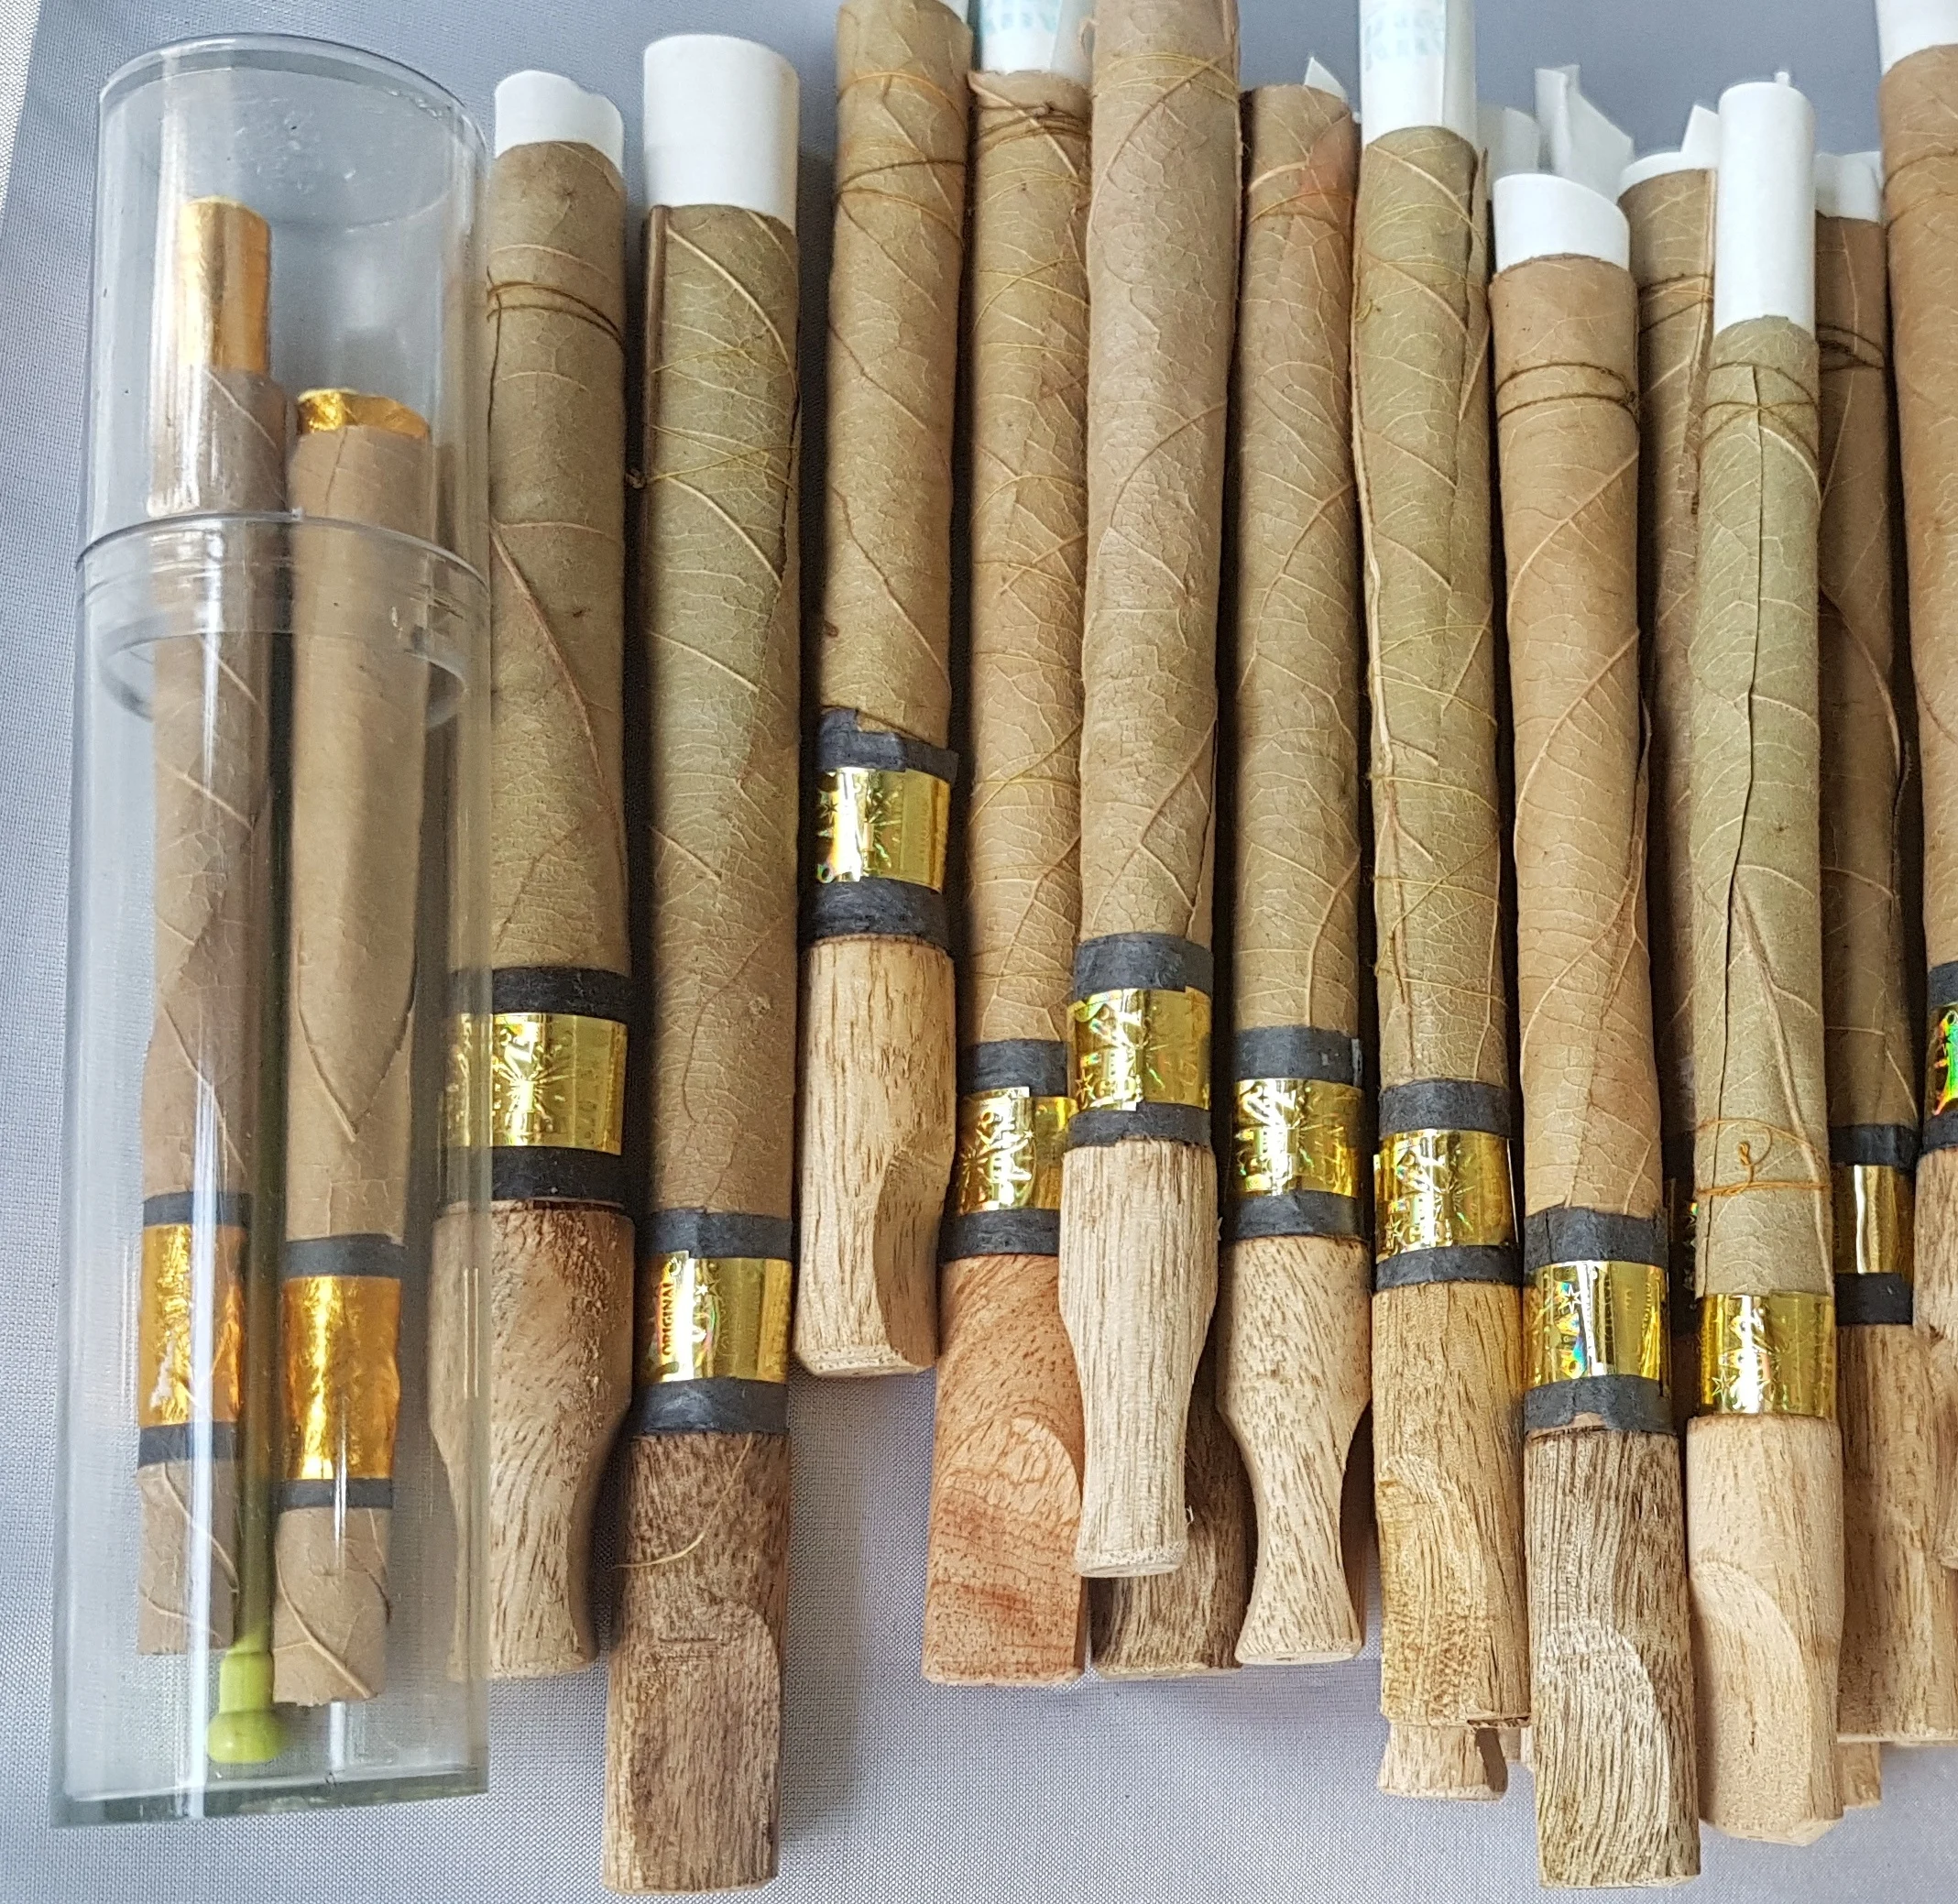 
Round End Wooden 11x38 mm Cigar Tips for Pre Roll Smoking leaf Pre Rolls and blunts, wooden tips blunts looking for distributors  (62002635827)